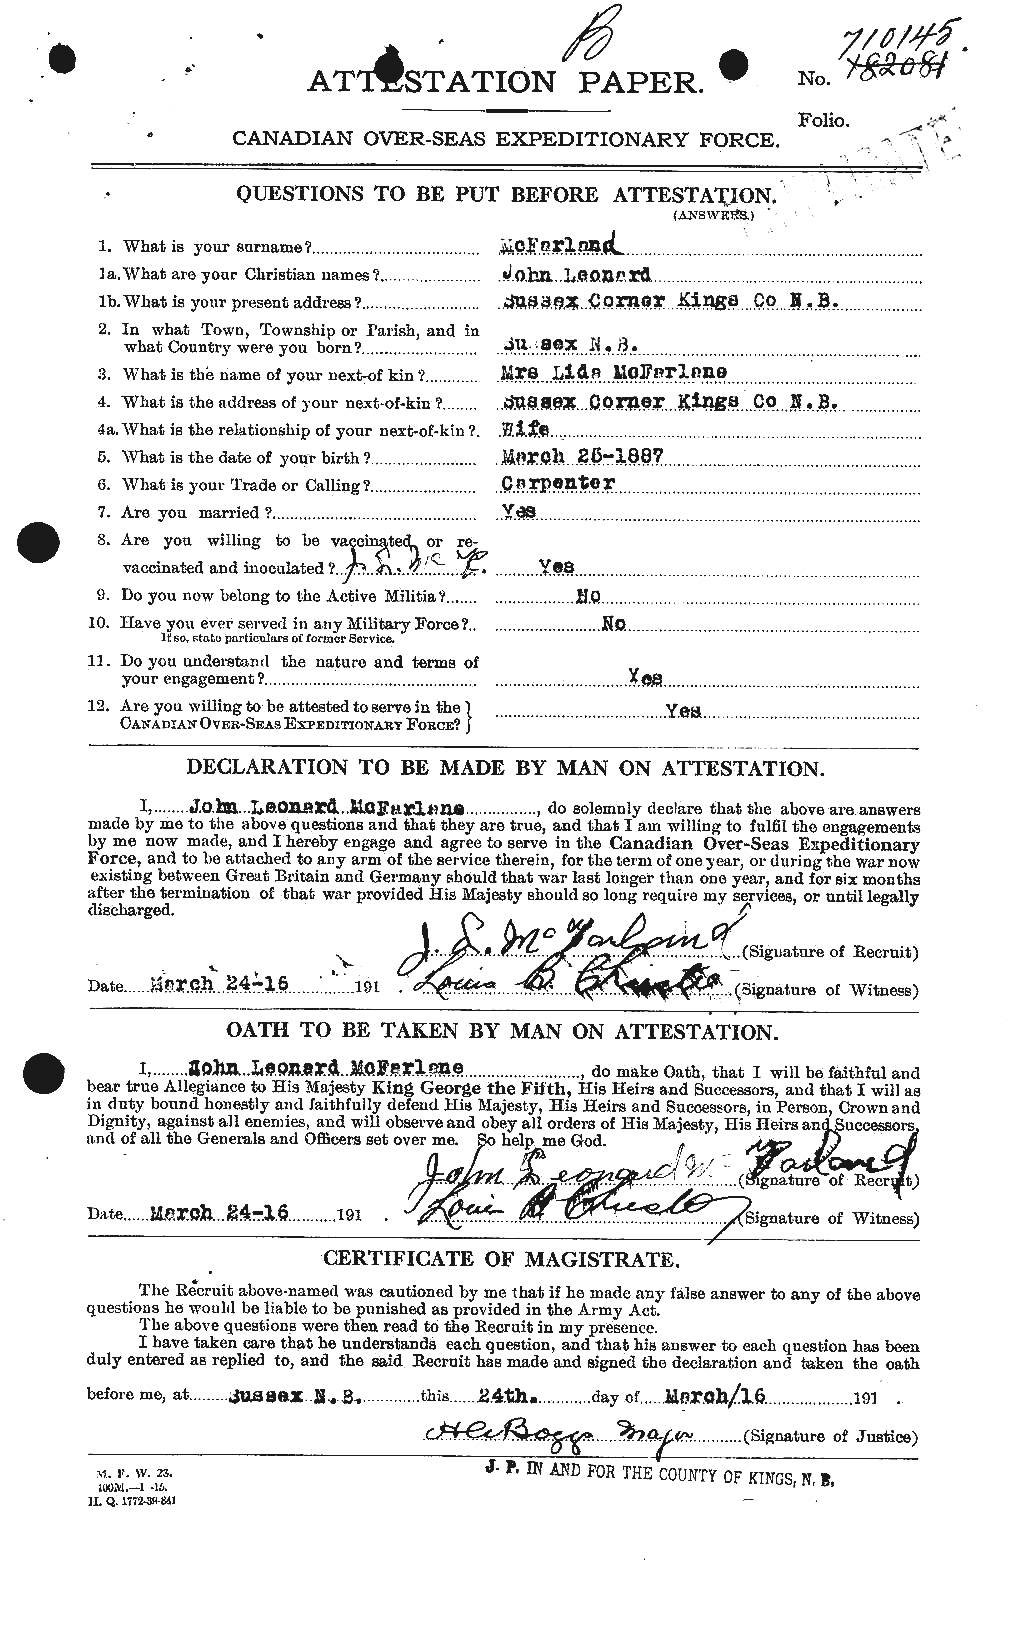 Personnel Records of the First World War - CEF 521304a